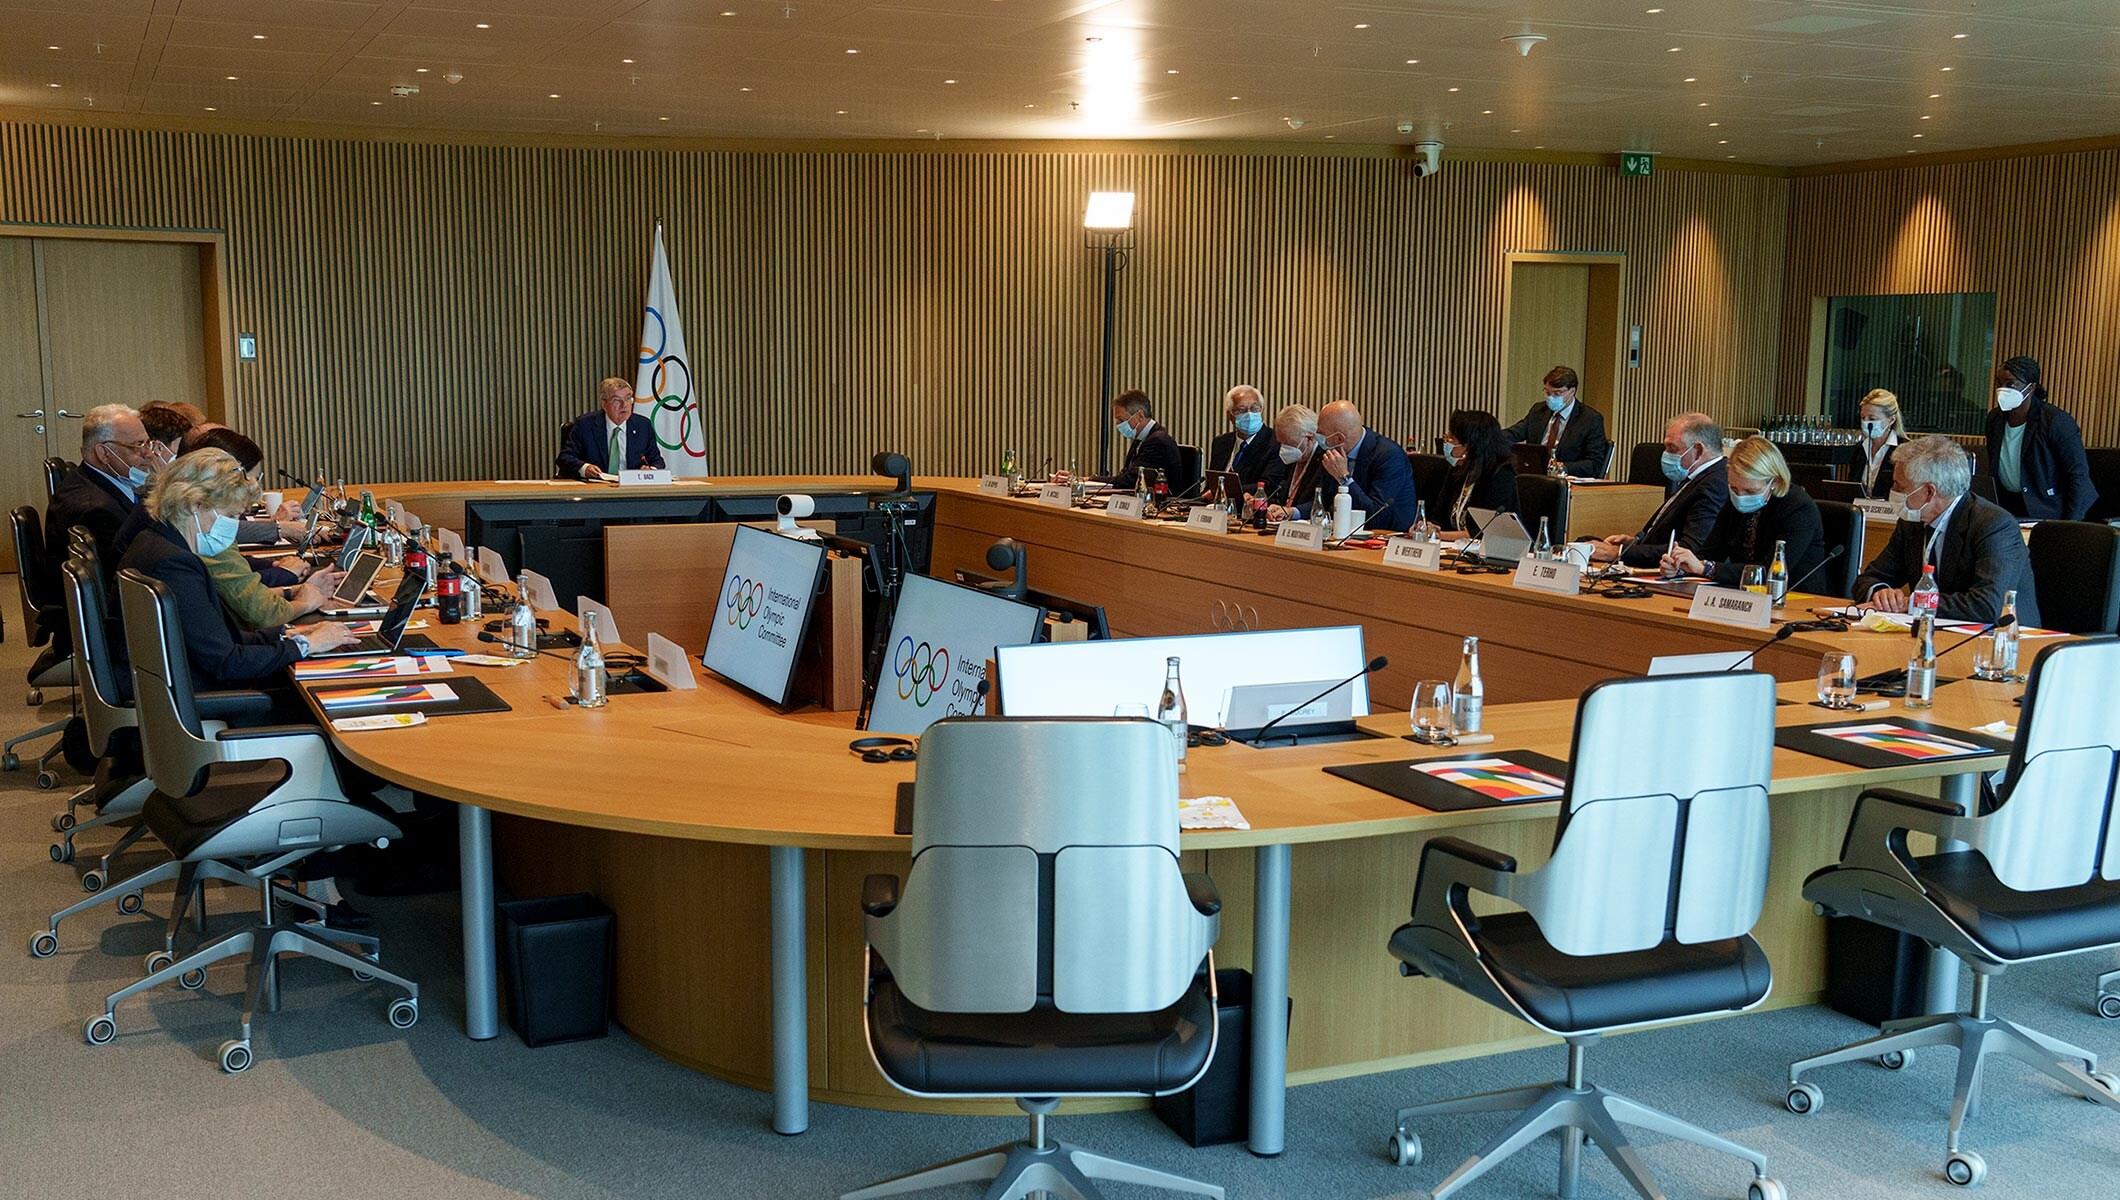 IOC President, Thomas Bach holds the IOC Executive Board Meeting at Olympic House